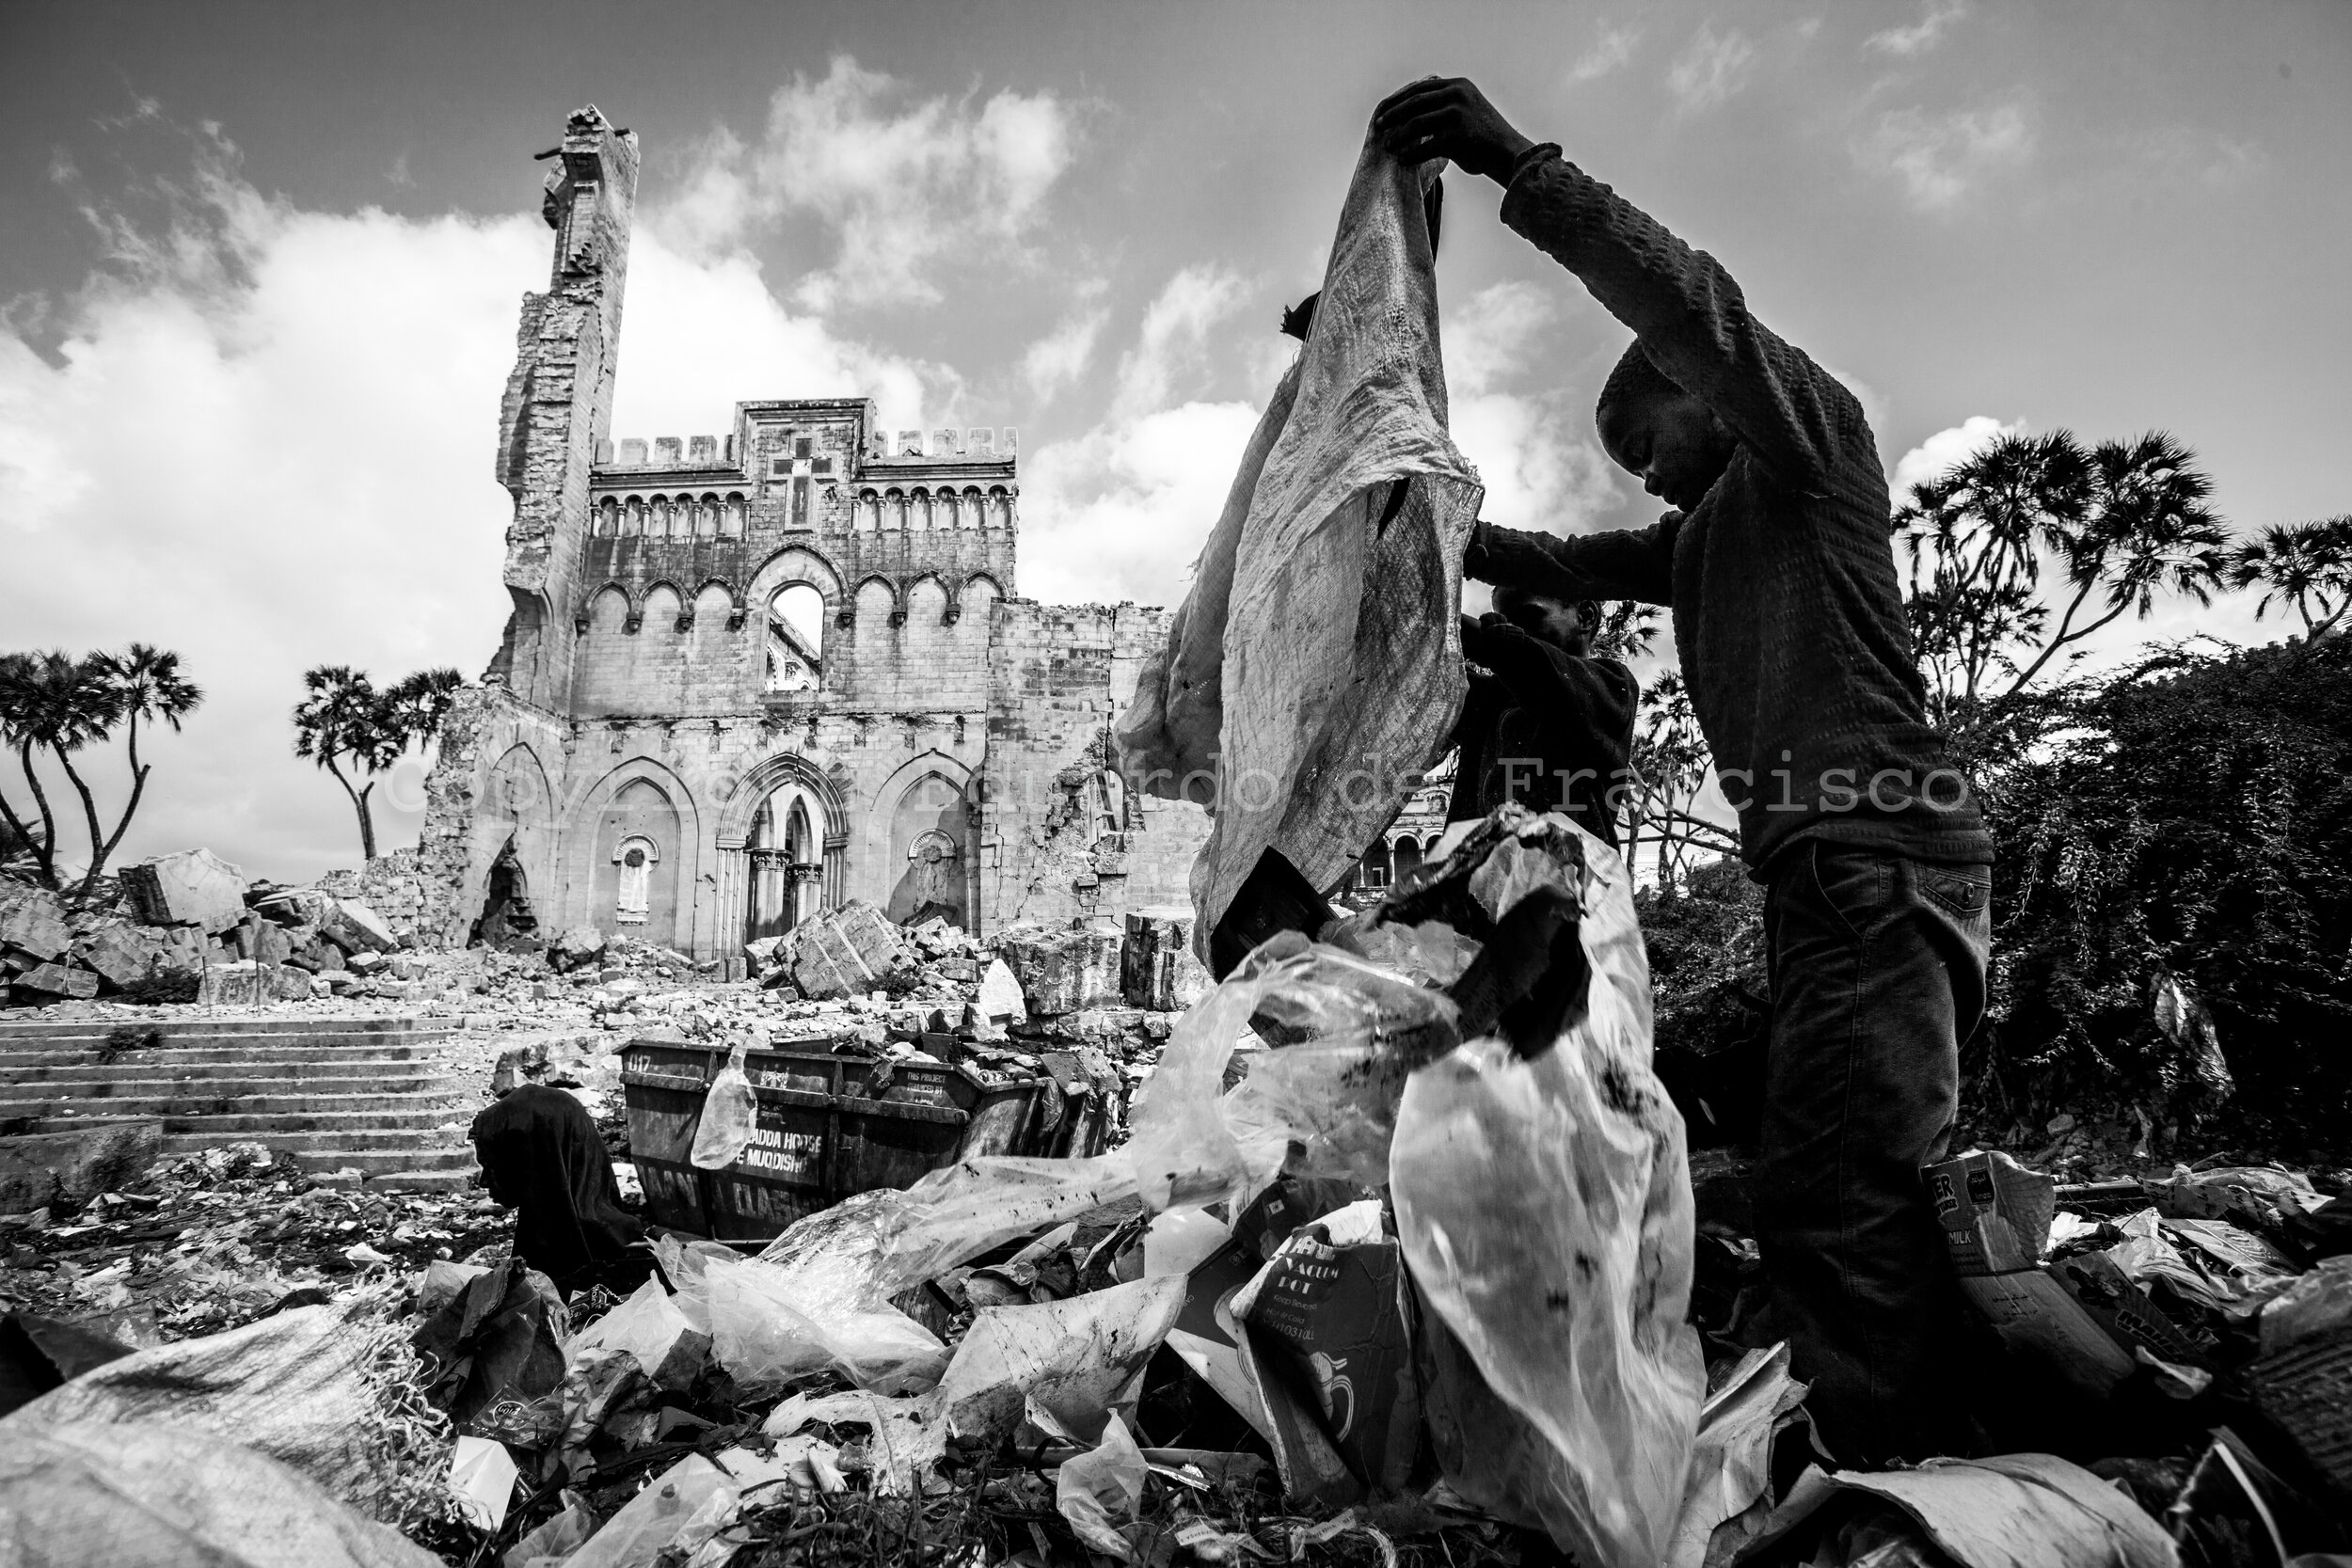  Street children foraging for anything valuable in the rubbish mounds accumulated in front of the catholic cathedral of Mogadishu. Built during the Italian colonization of the country, it was destroyed during the war, being bombed several times. Toda